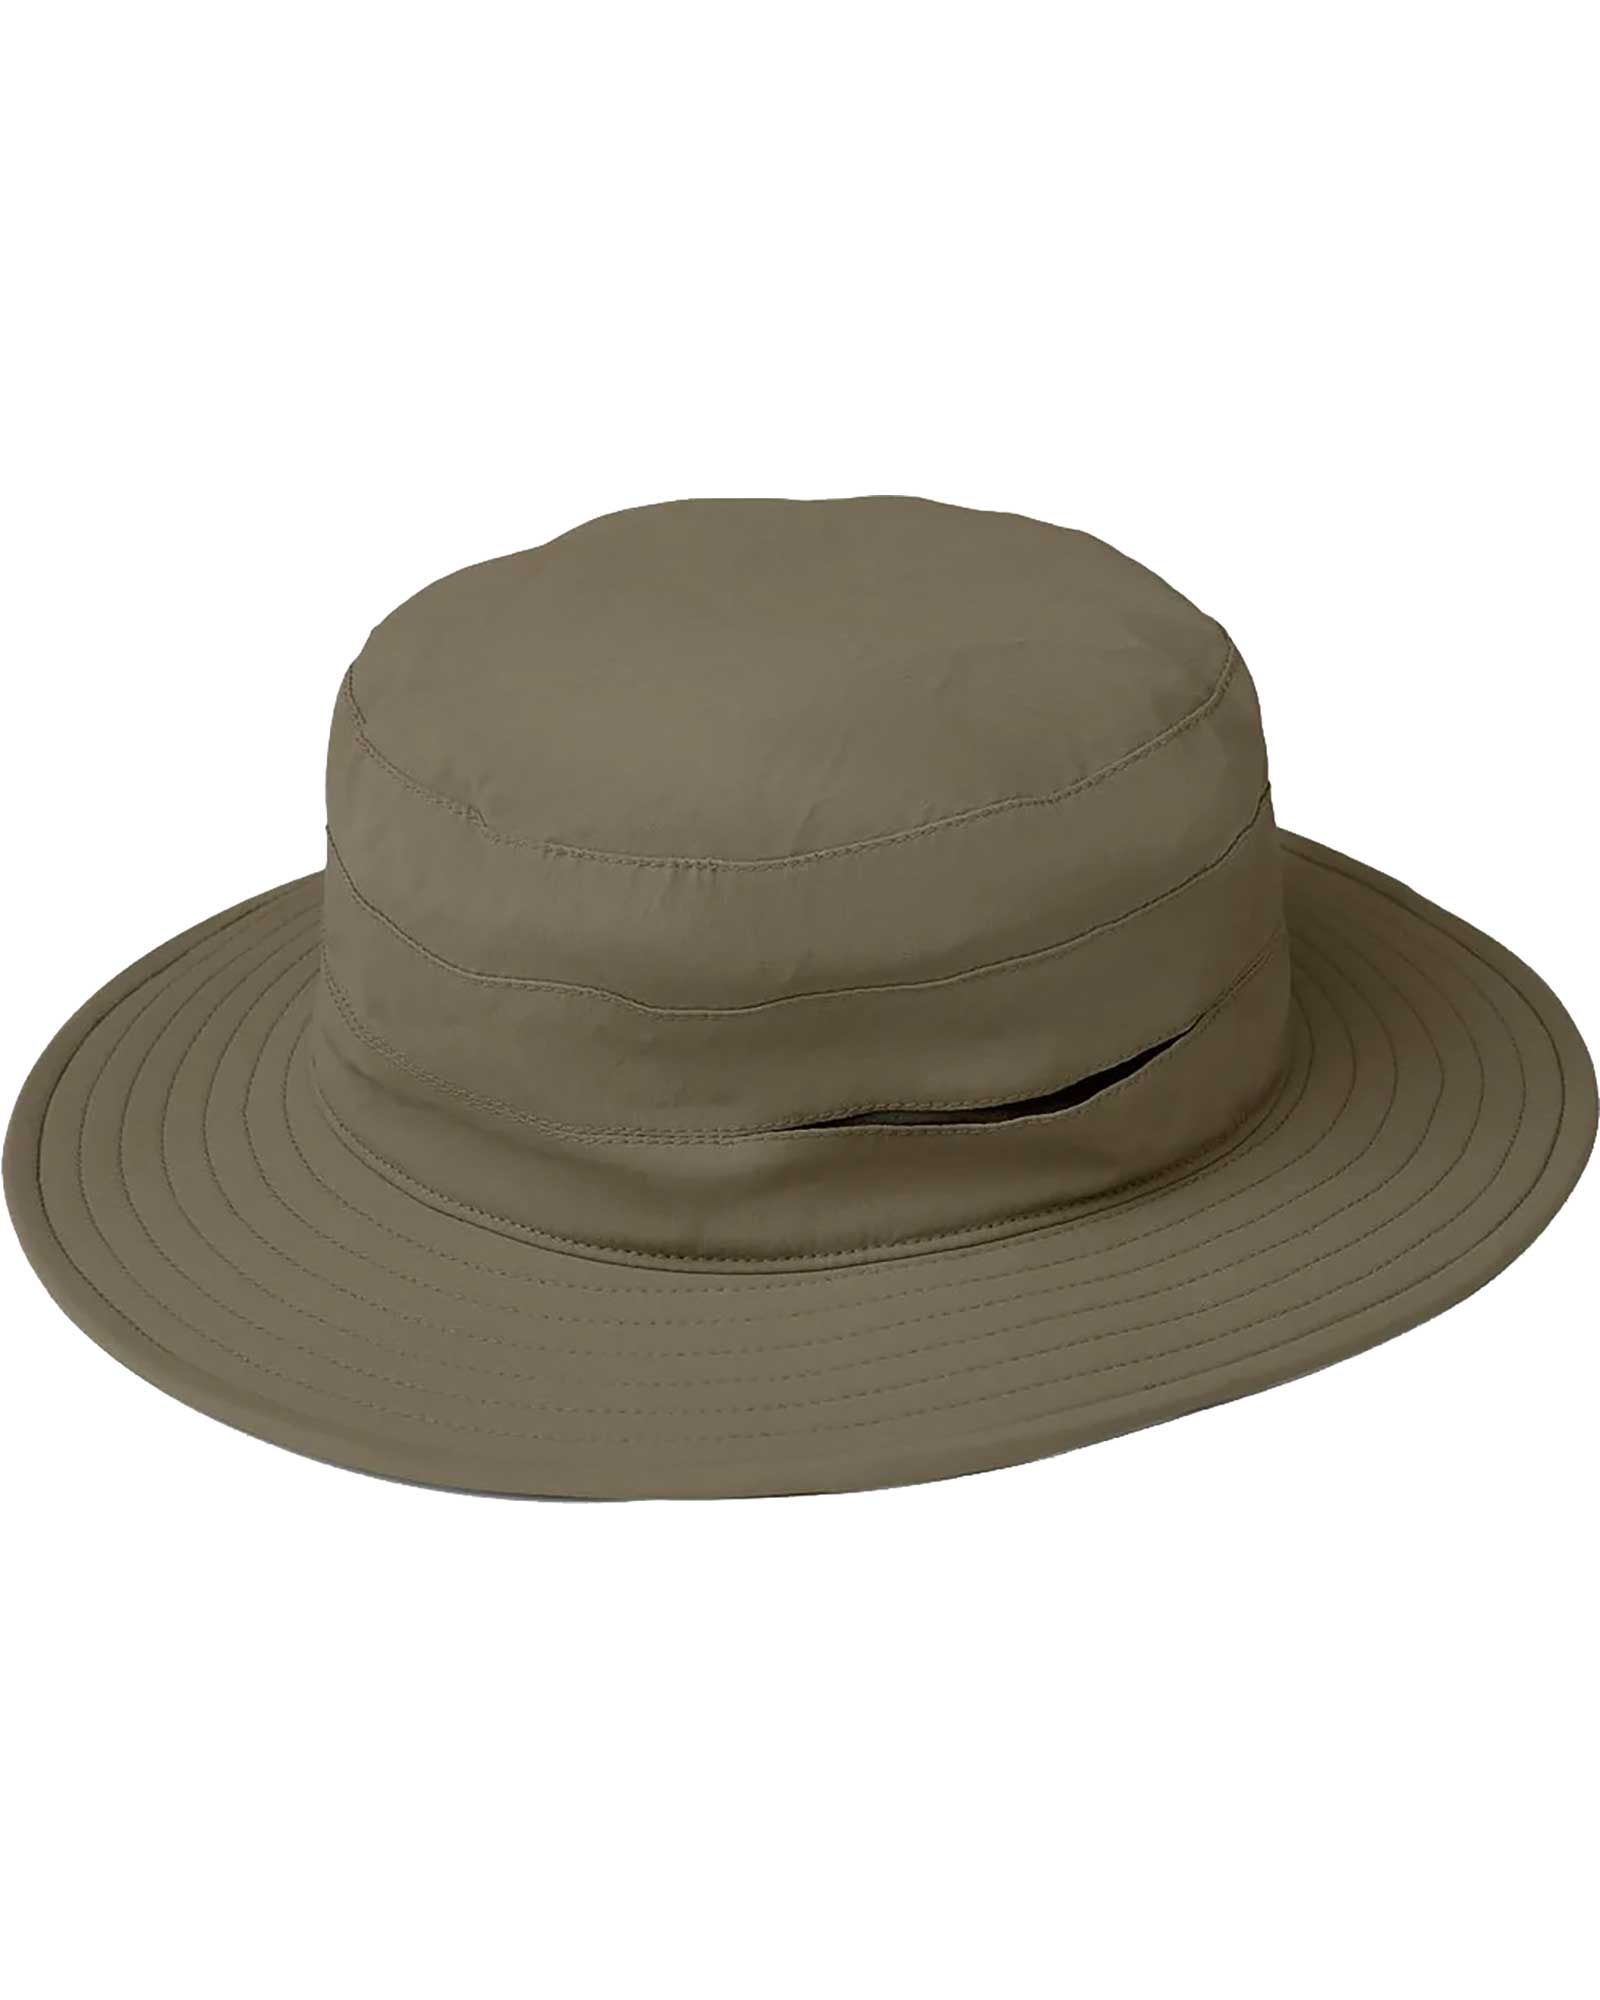 Product image of Tilley Ultralight Sun Hat